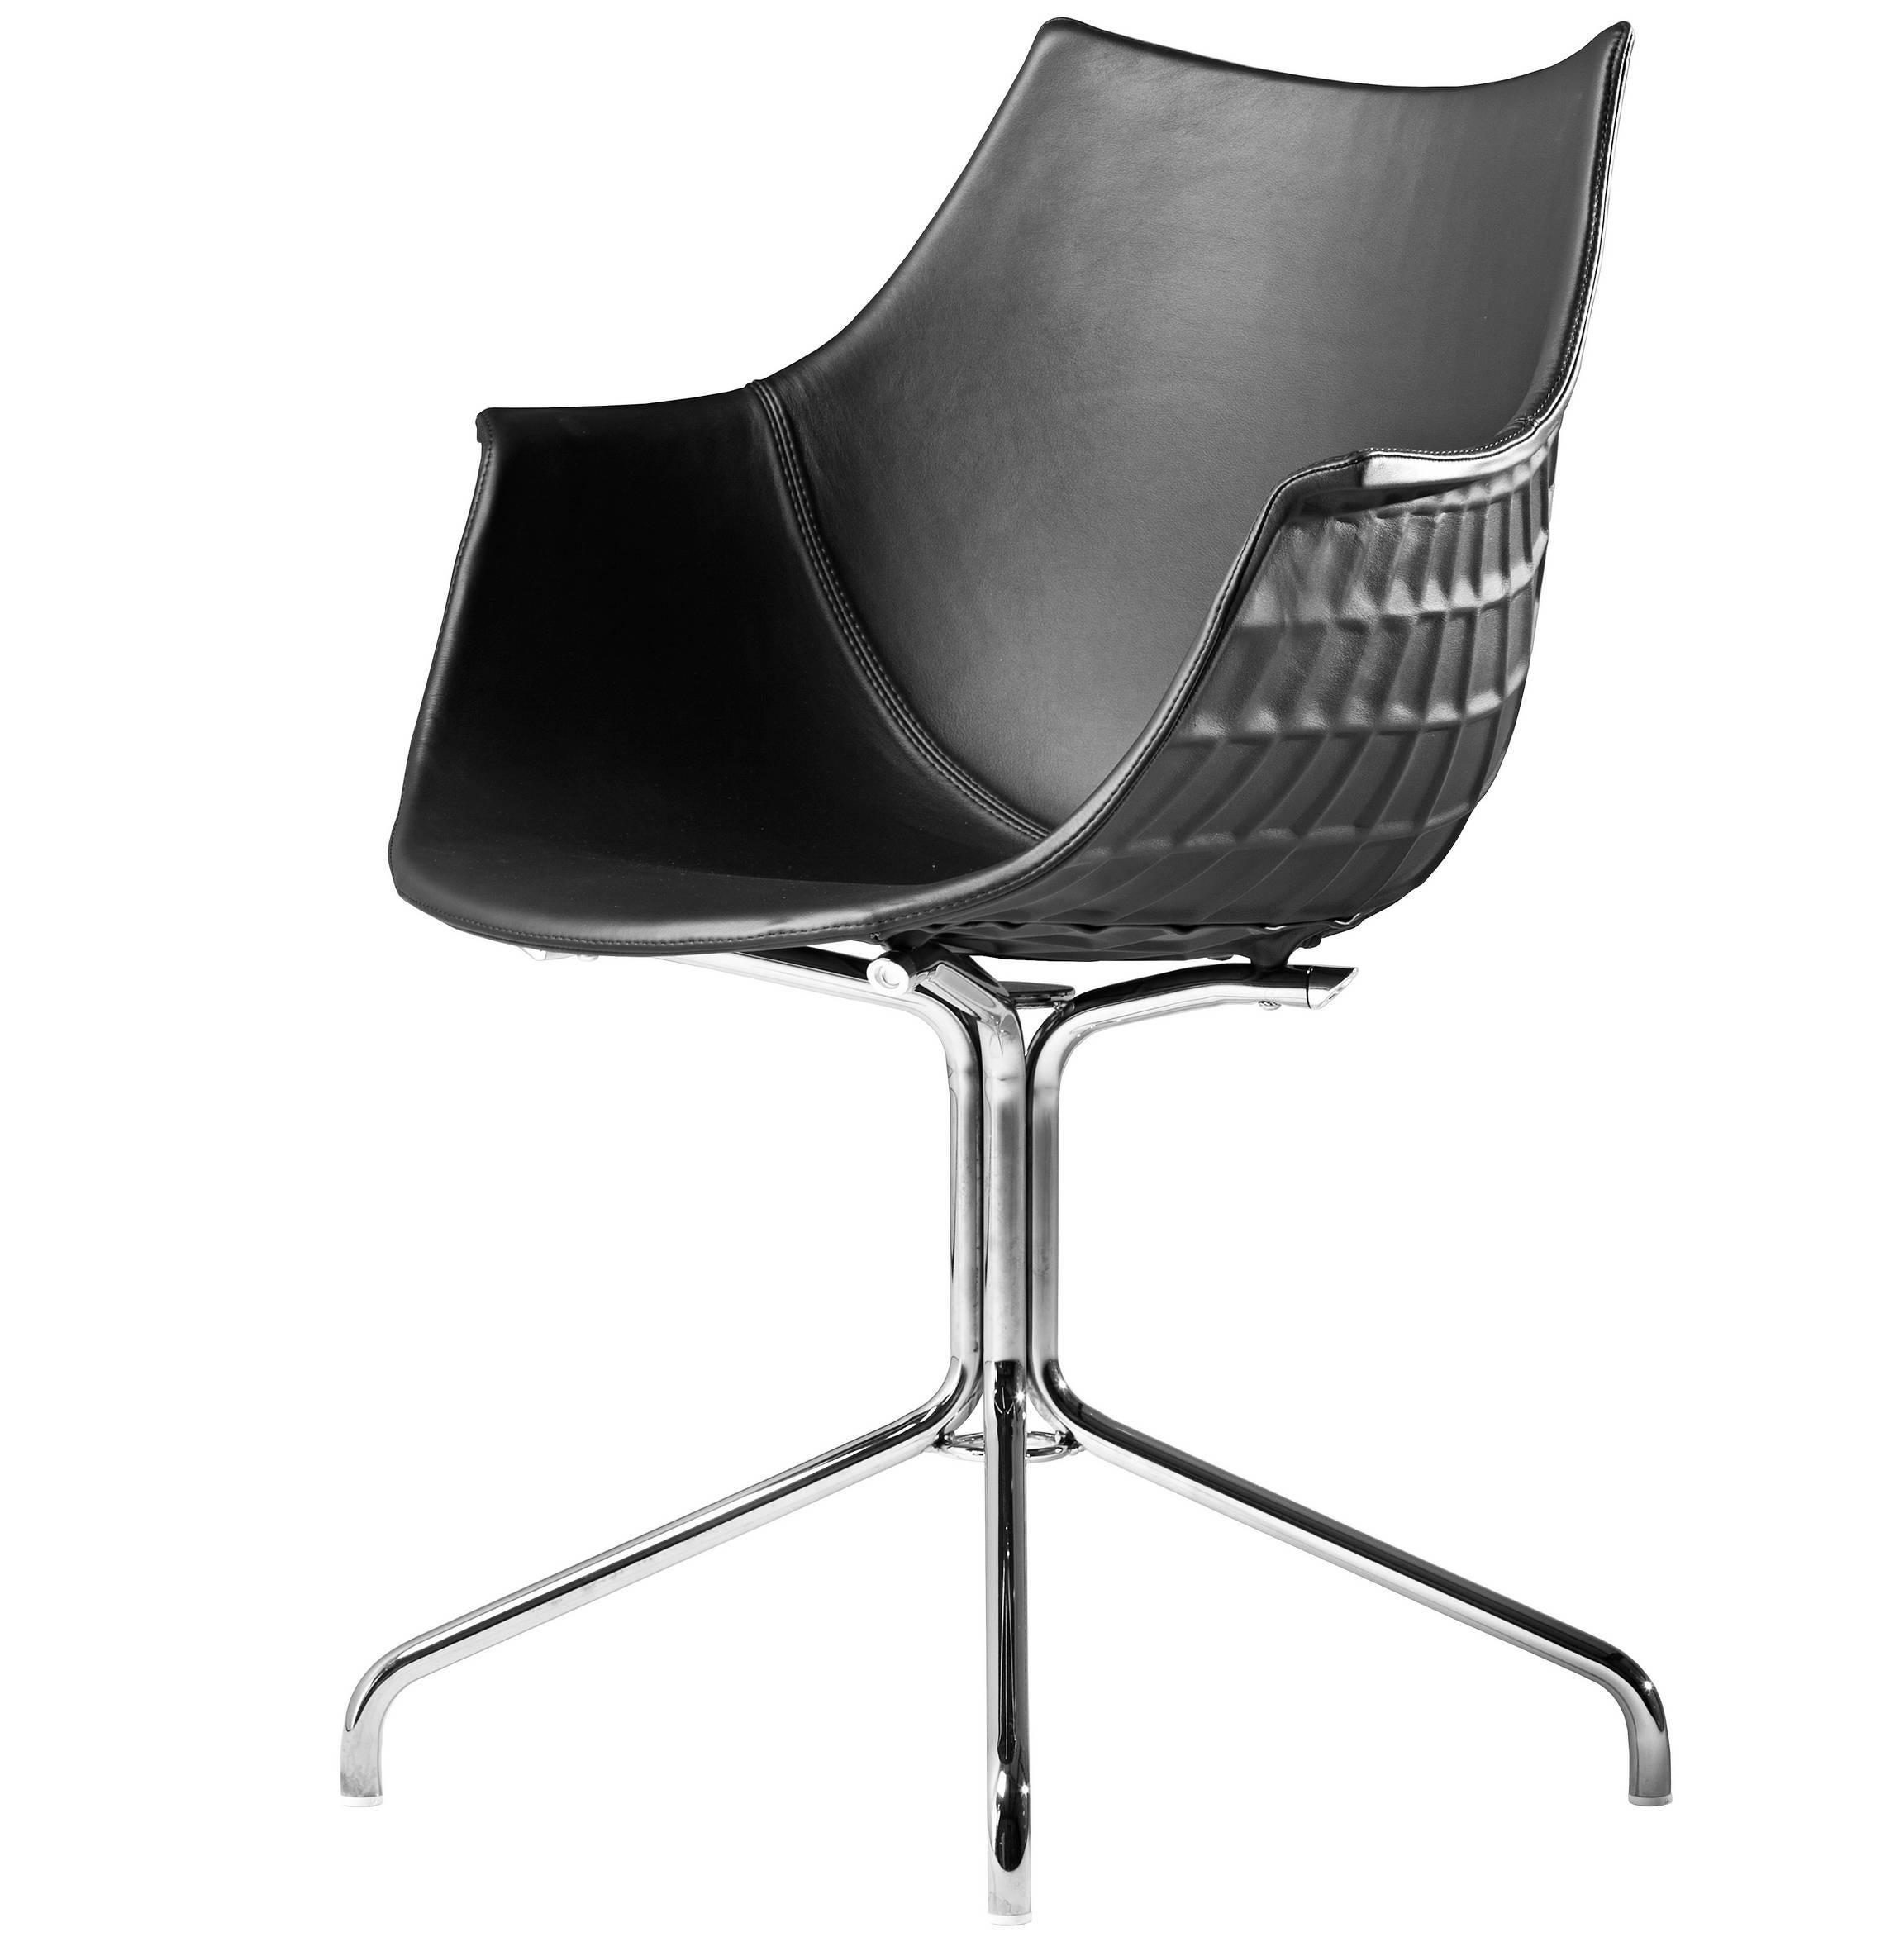 "Meridiana" Leather and Steel Chair Designed by Christophe Pillet for Driade